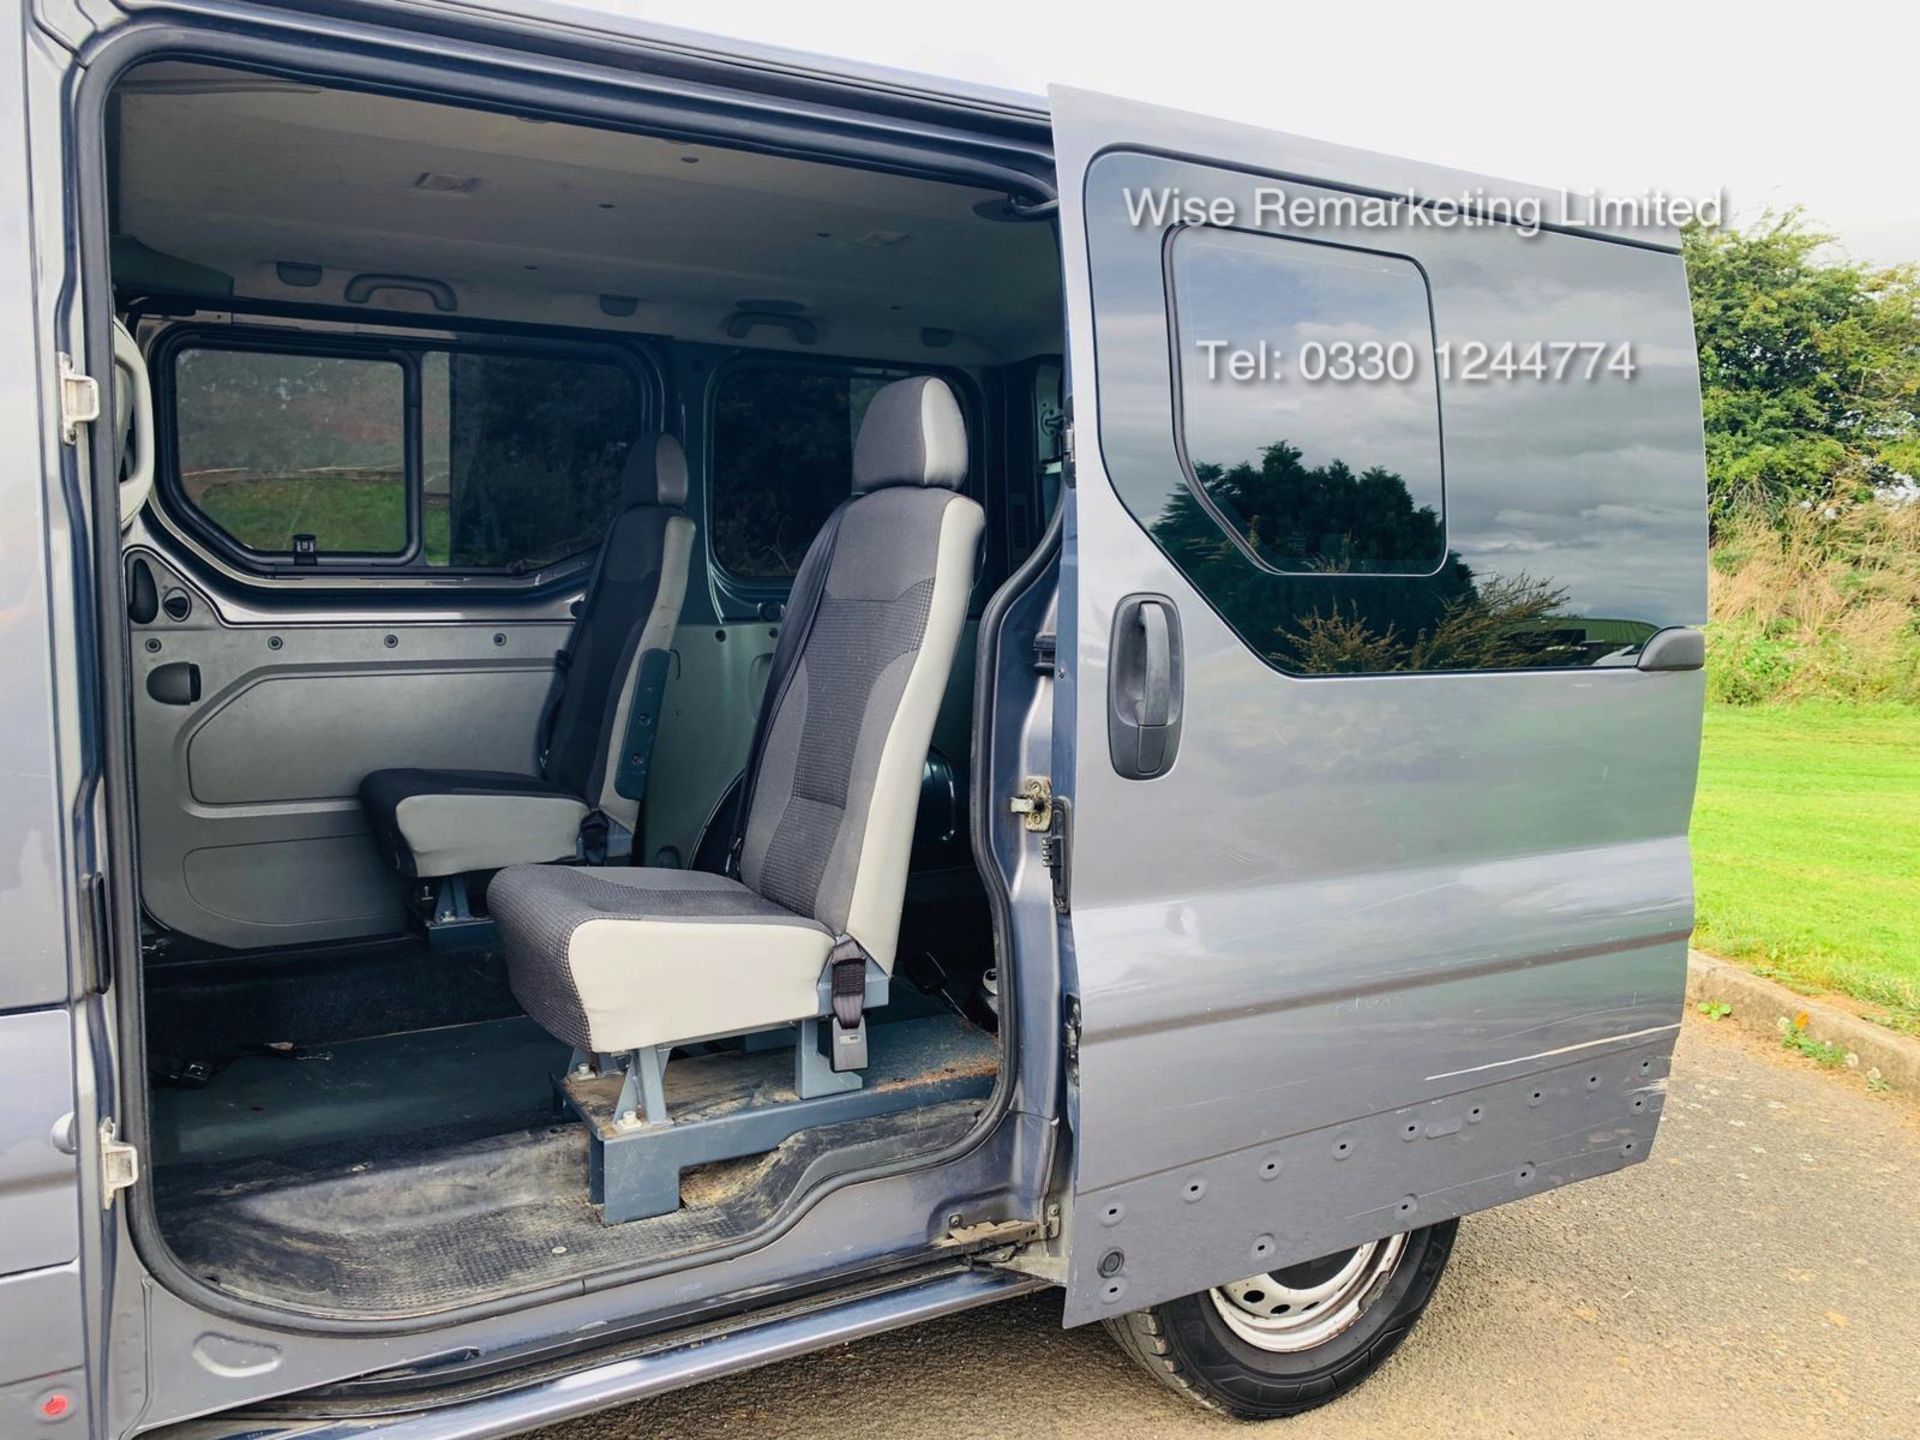 Vauxhall Vivaro 2.0 CDTI 2900 Minibus - 2014 Model - Wheel Chair Access - 1 Owner From New -History - Image 9 of 21